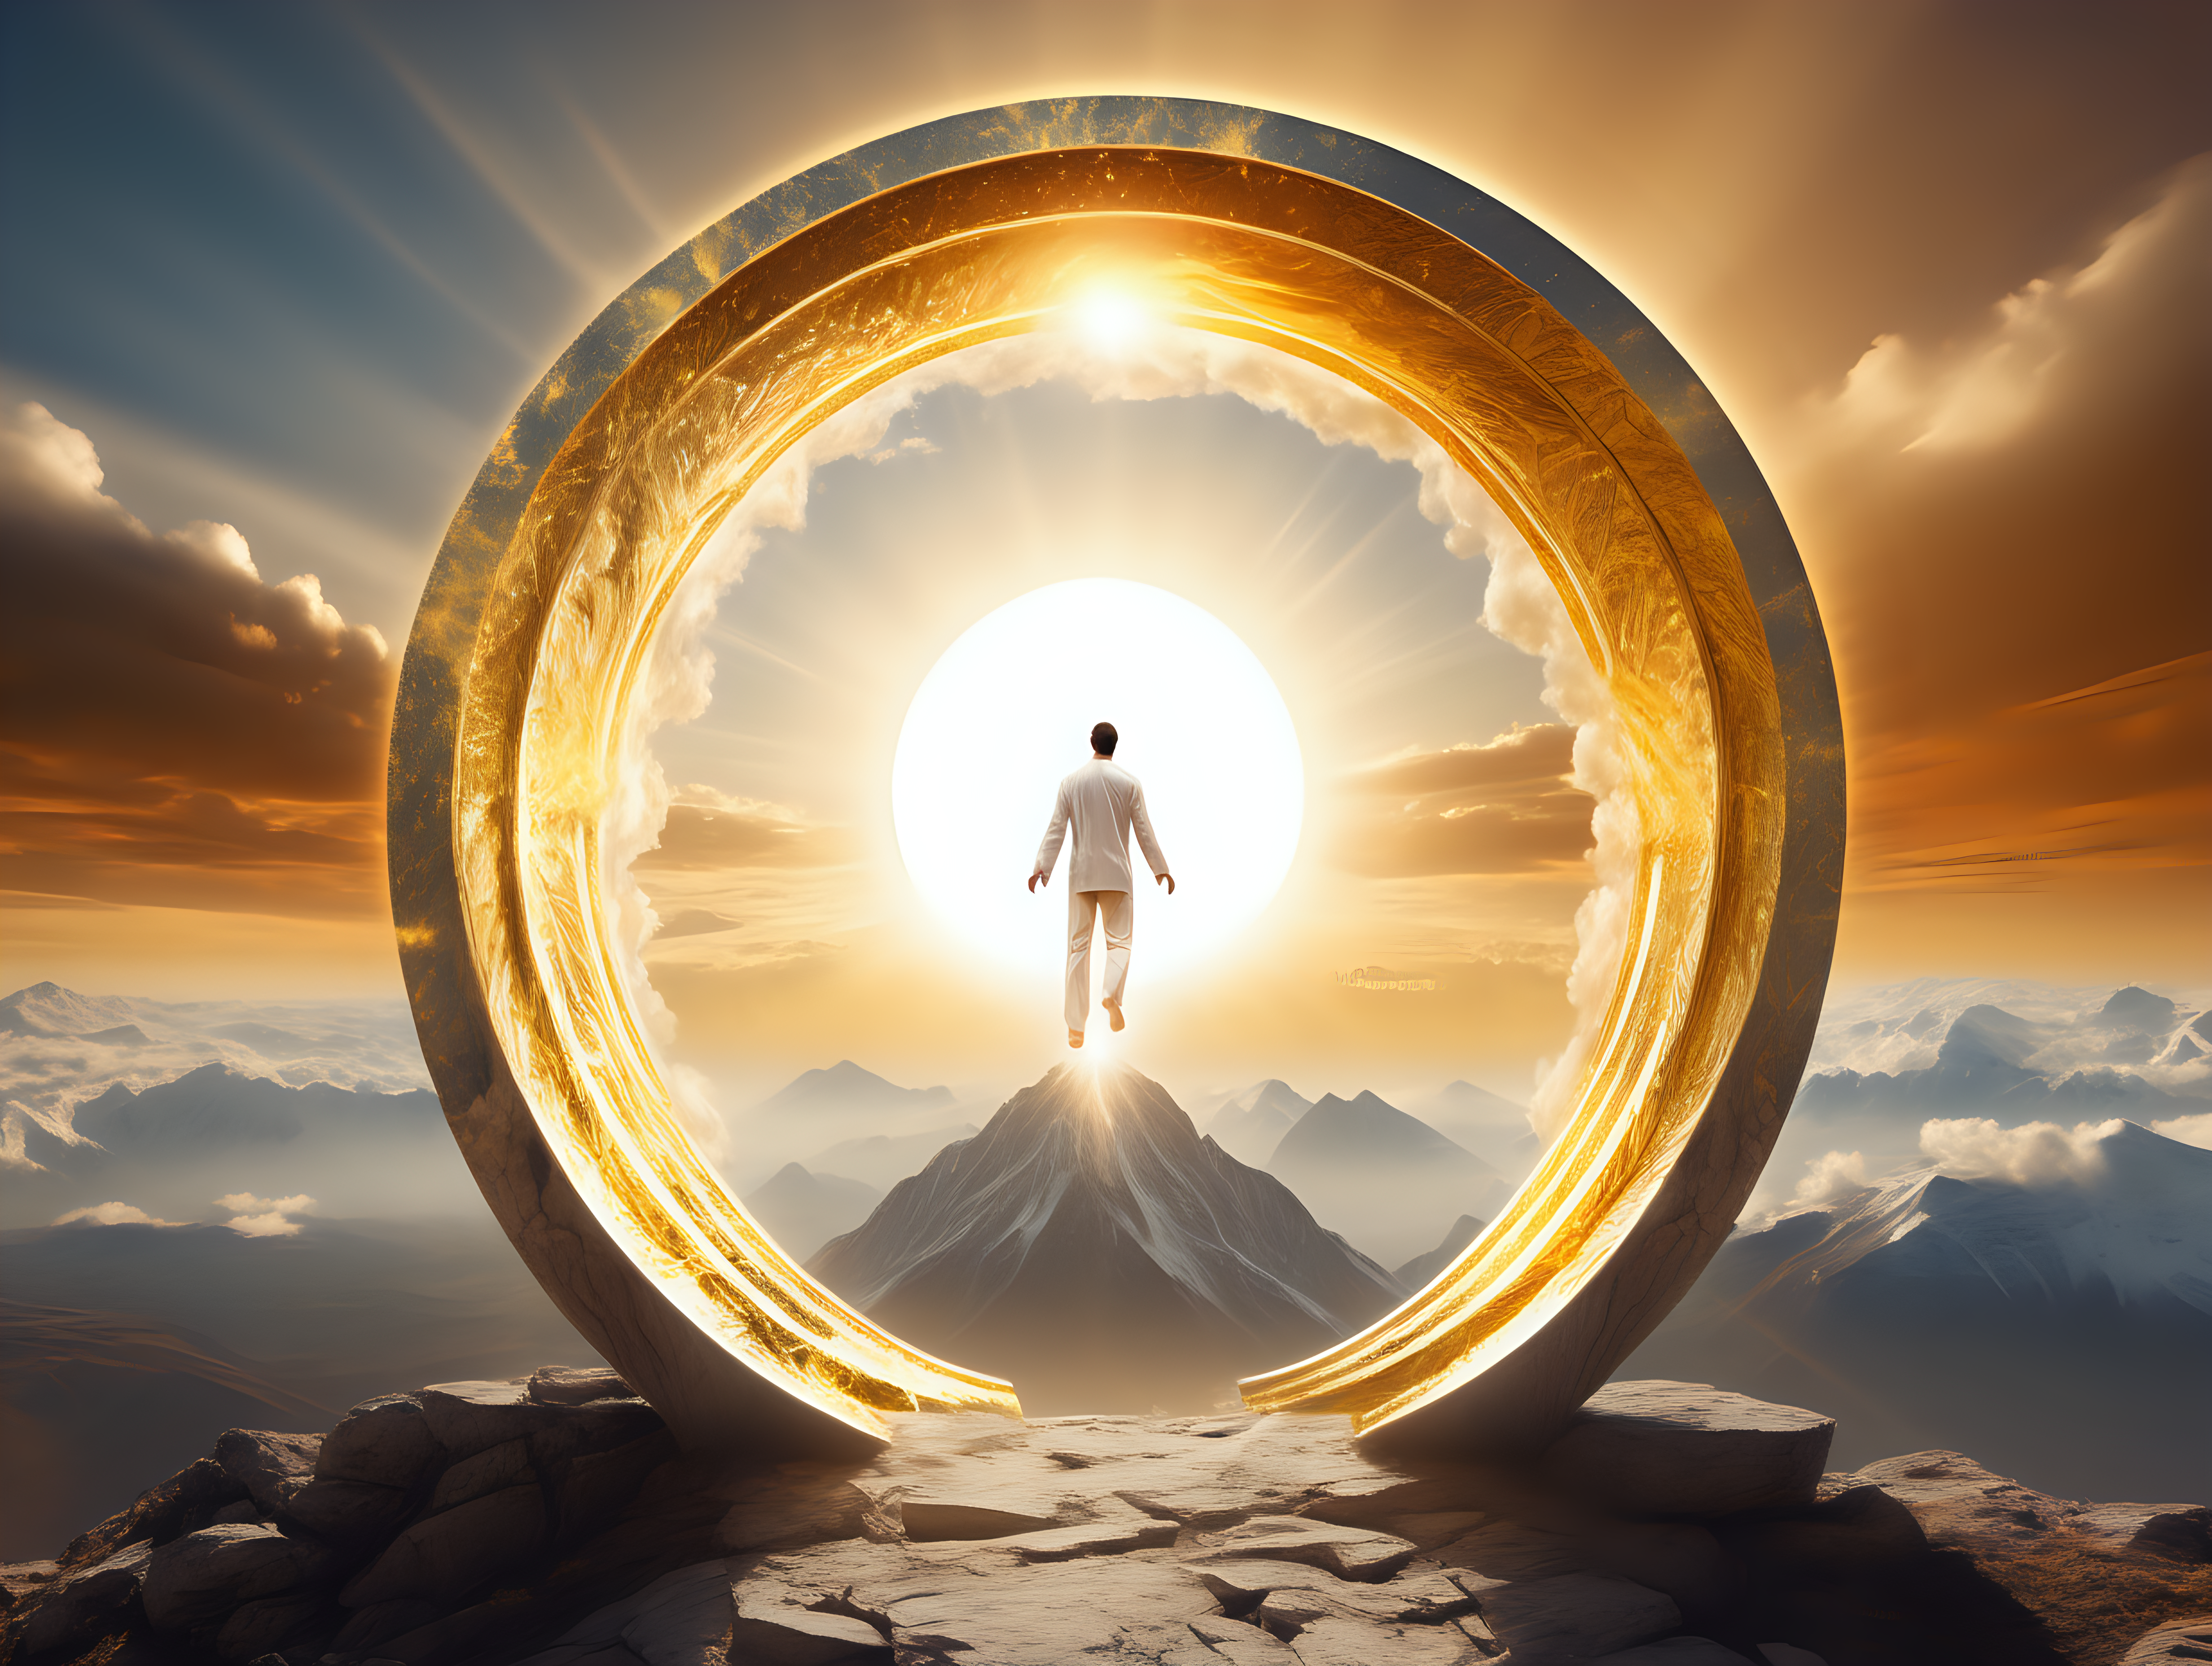 Create me a powerful image of a human stepping through a portal in the sky on top of a massive mountain having a transcendental experience during a golden sunset

Use props like: mind, energy, natural elements, quantum field hypnosis, energetics, portal, consciousness

make the colours mainly white and gold